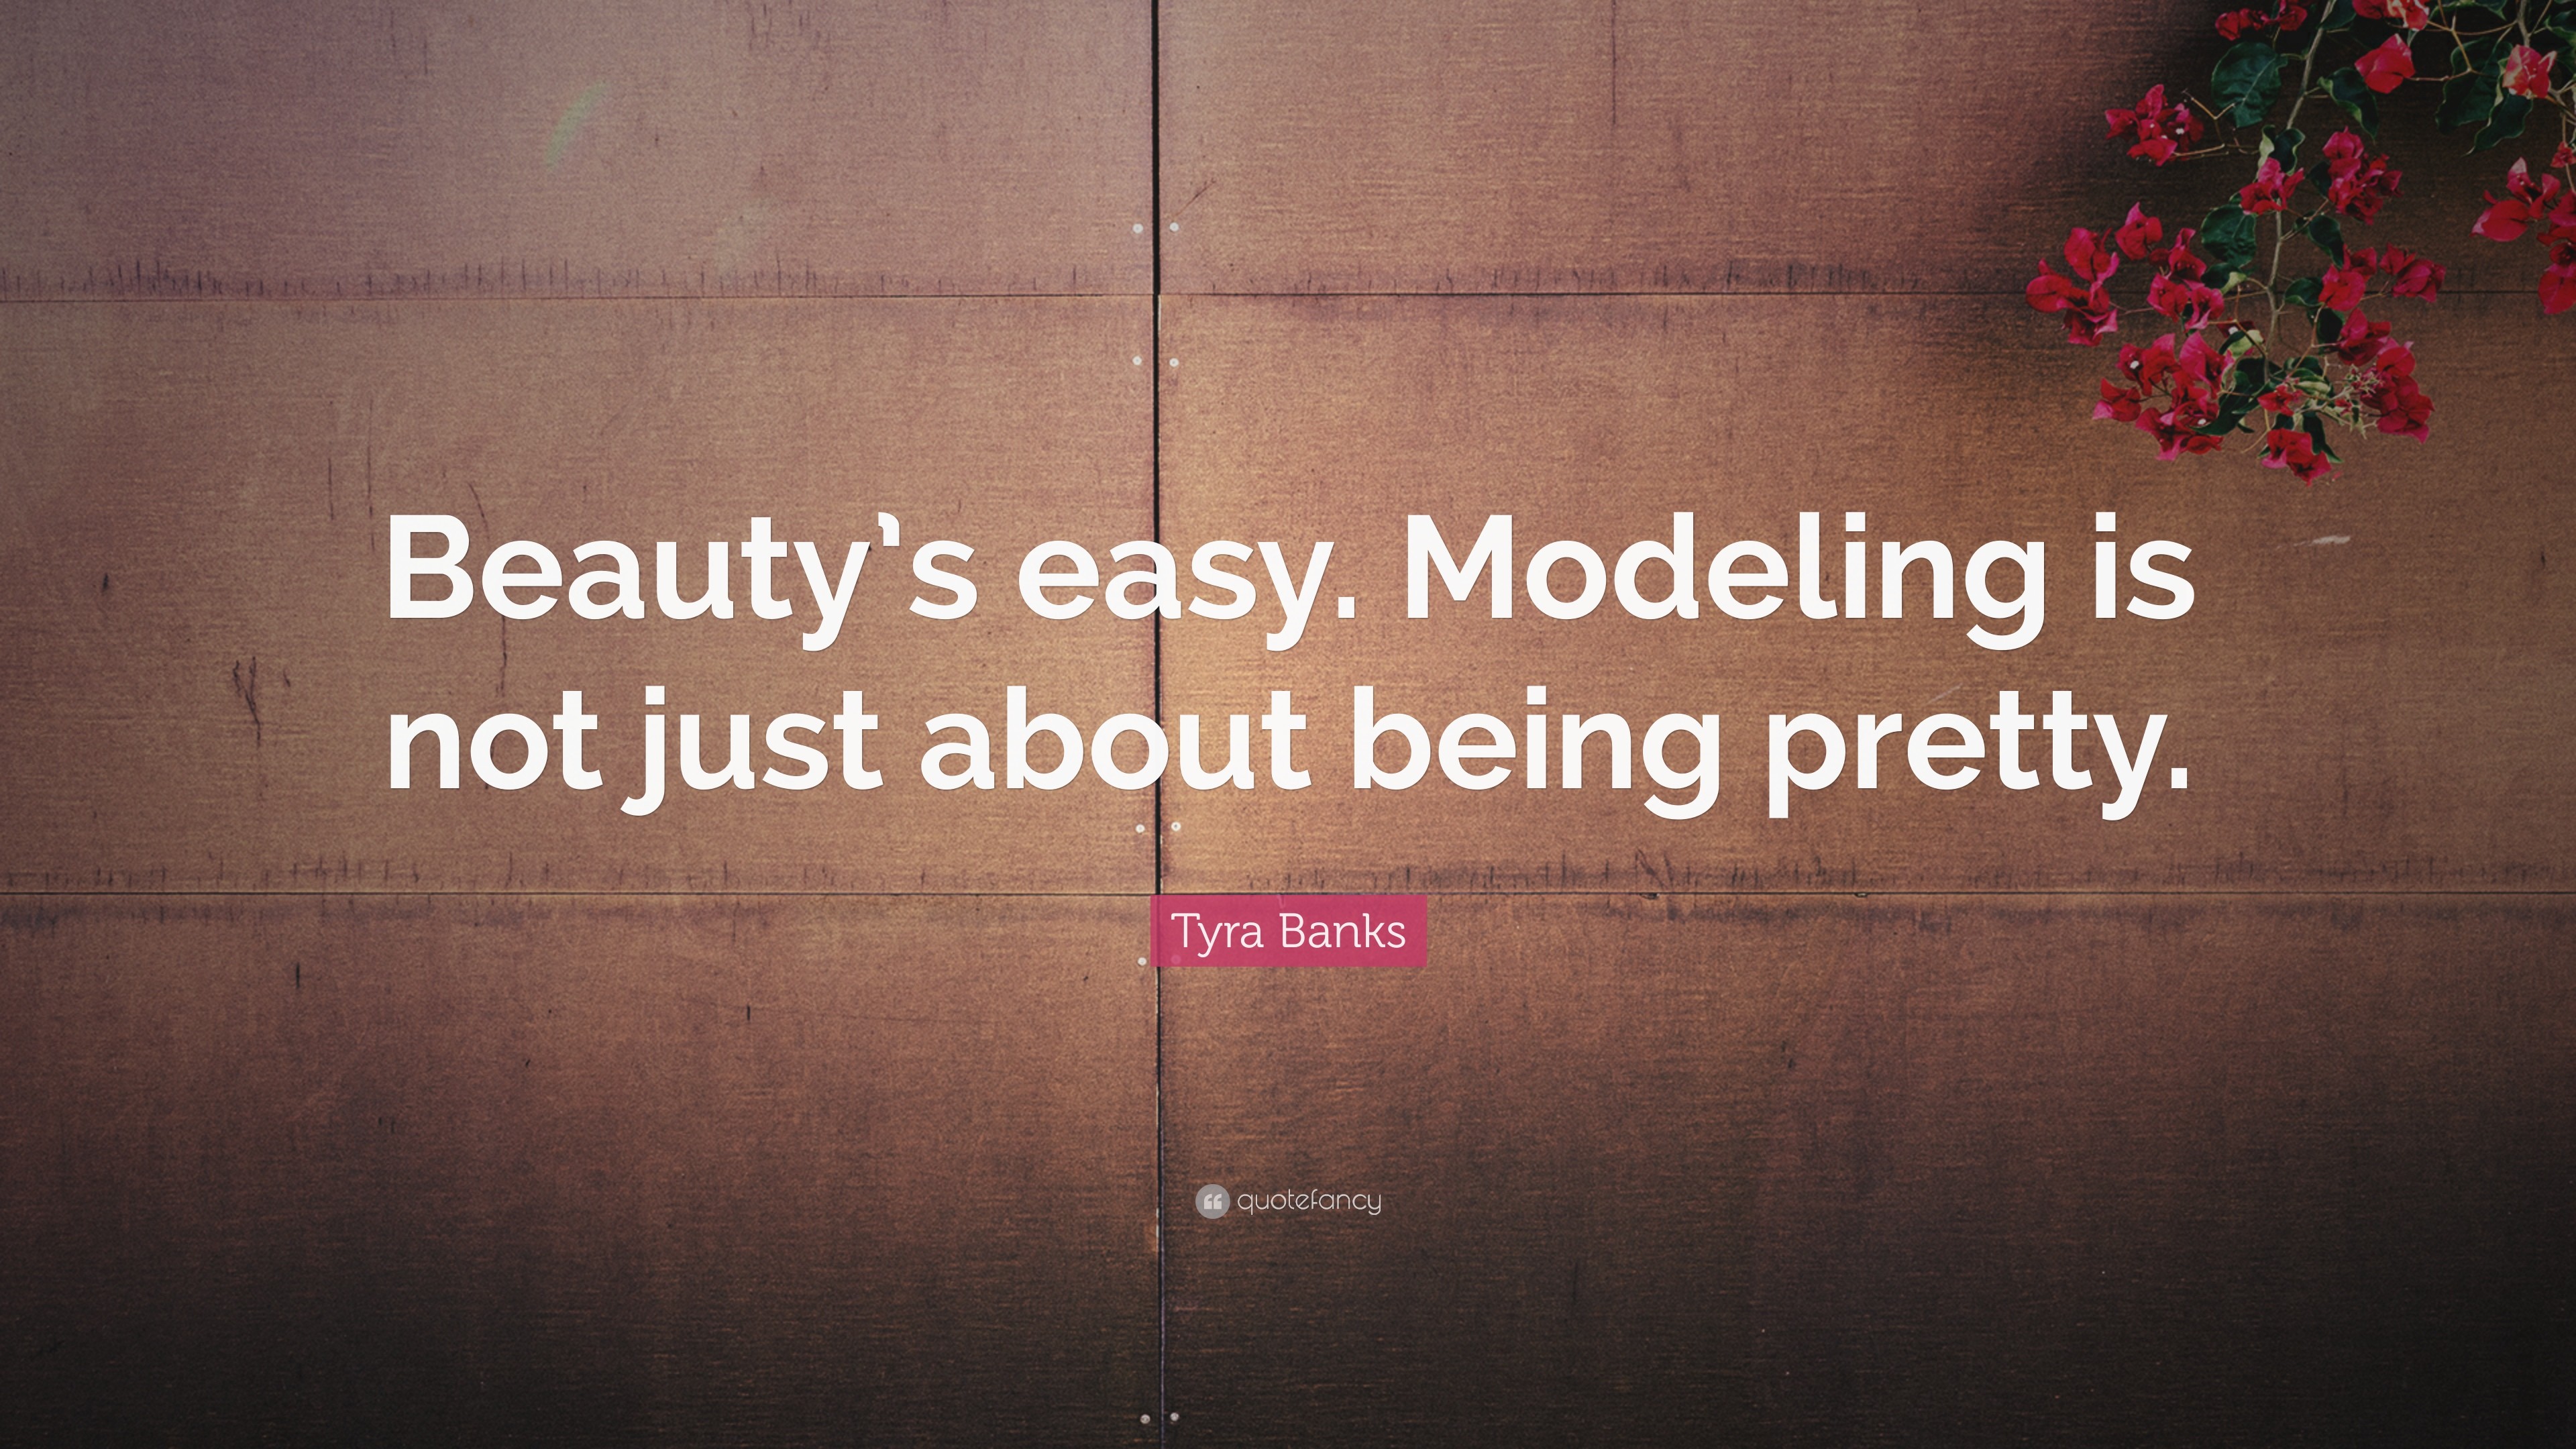 3840x2160 Tyra Banks Quote: “Beauty's easy. Modeling is not just about being pretty.